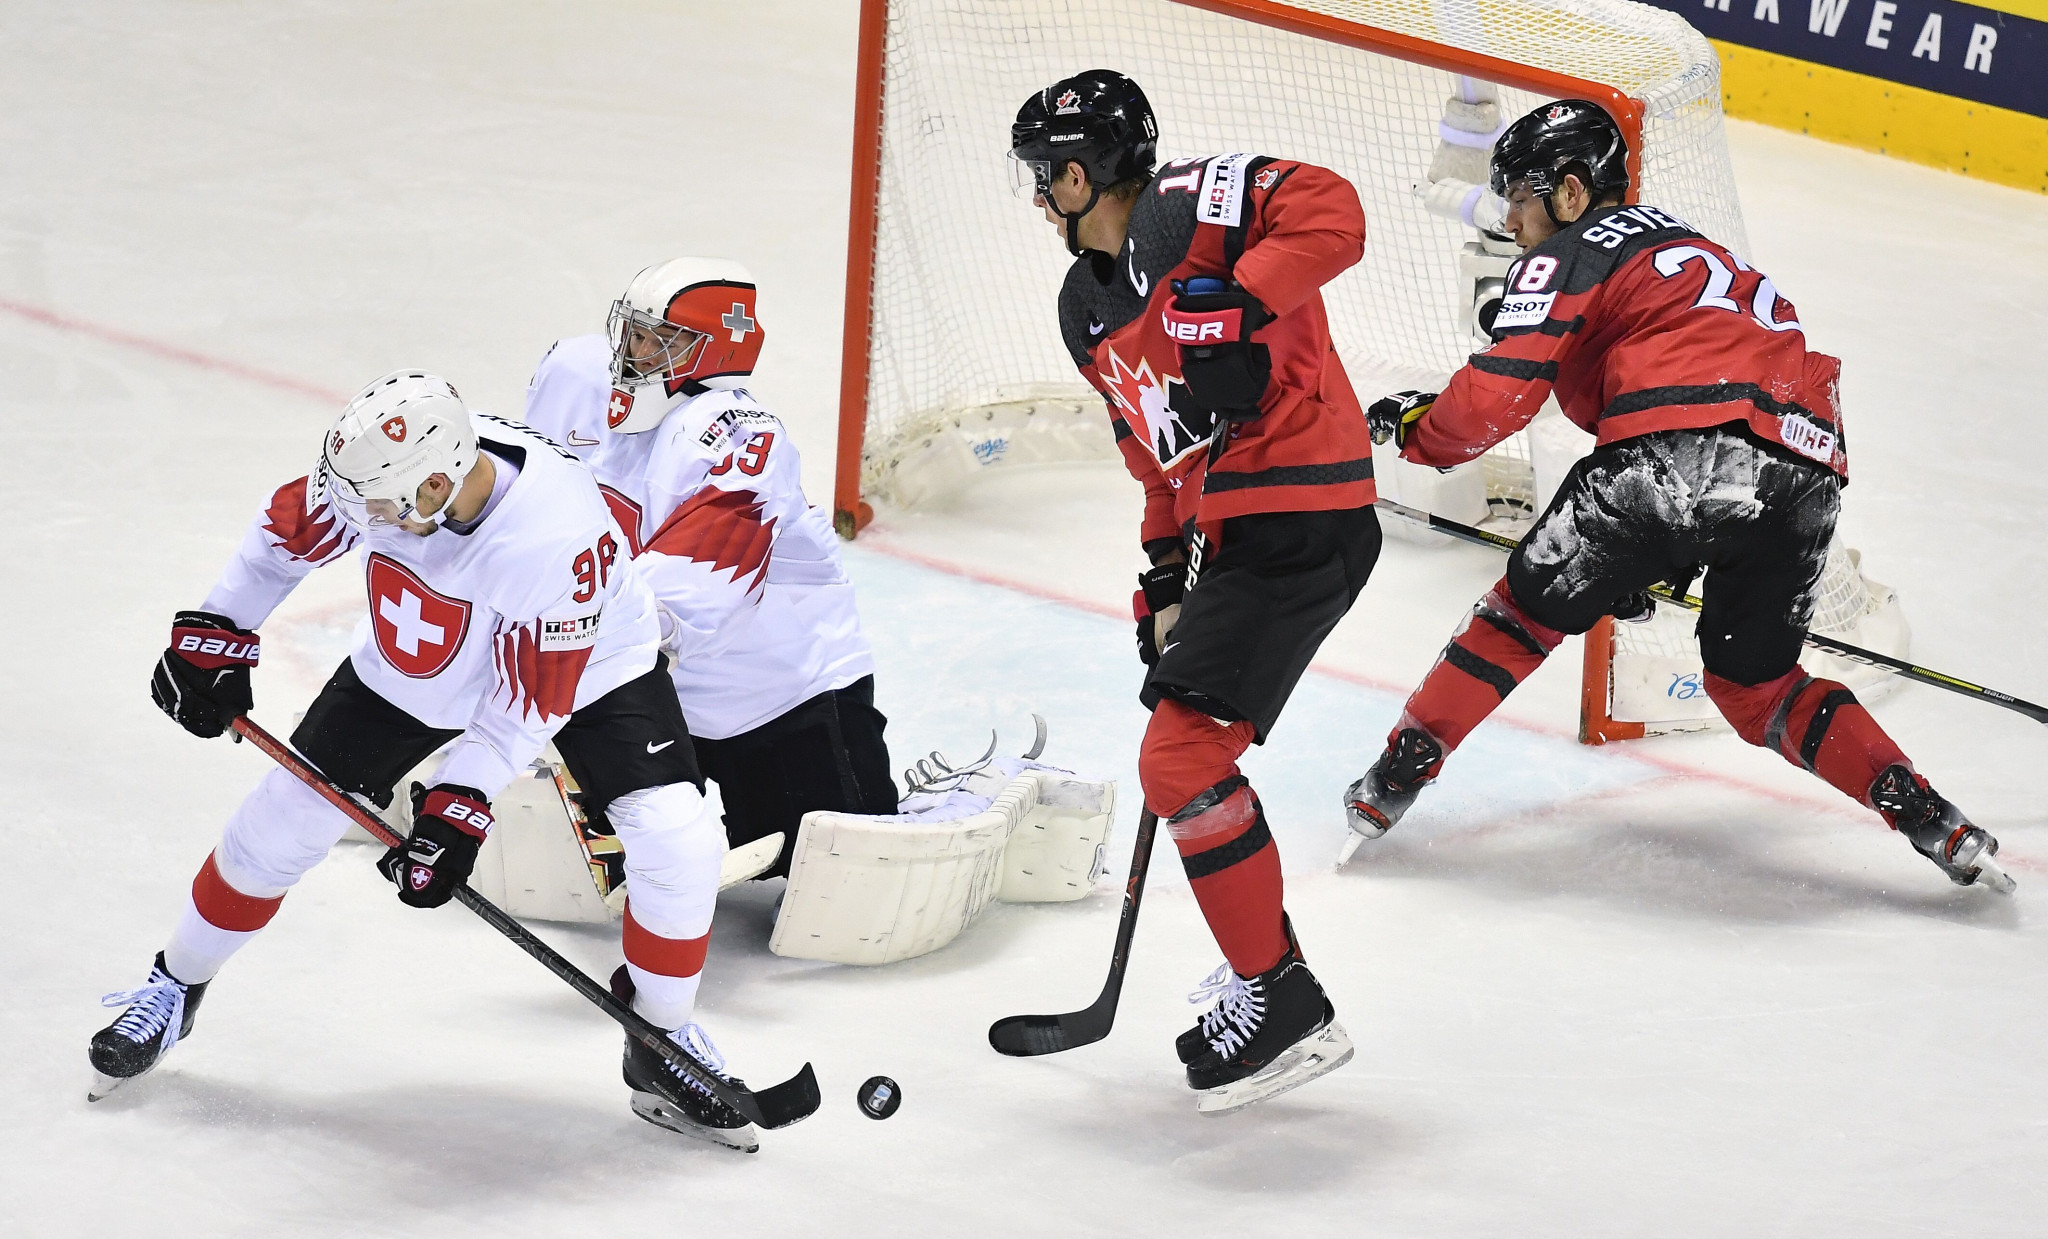 Tickets for 2020 IIHF Ice Hockey World Championship knockout stage go on sale